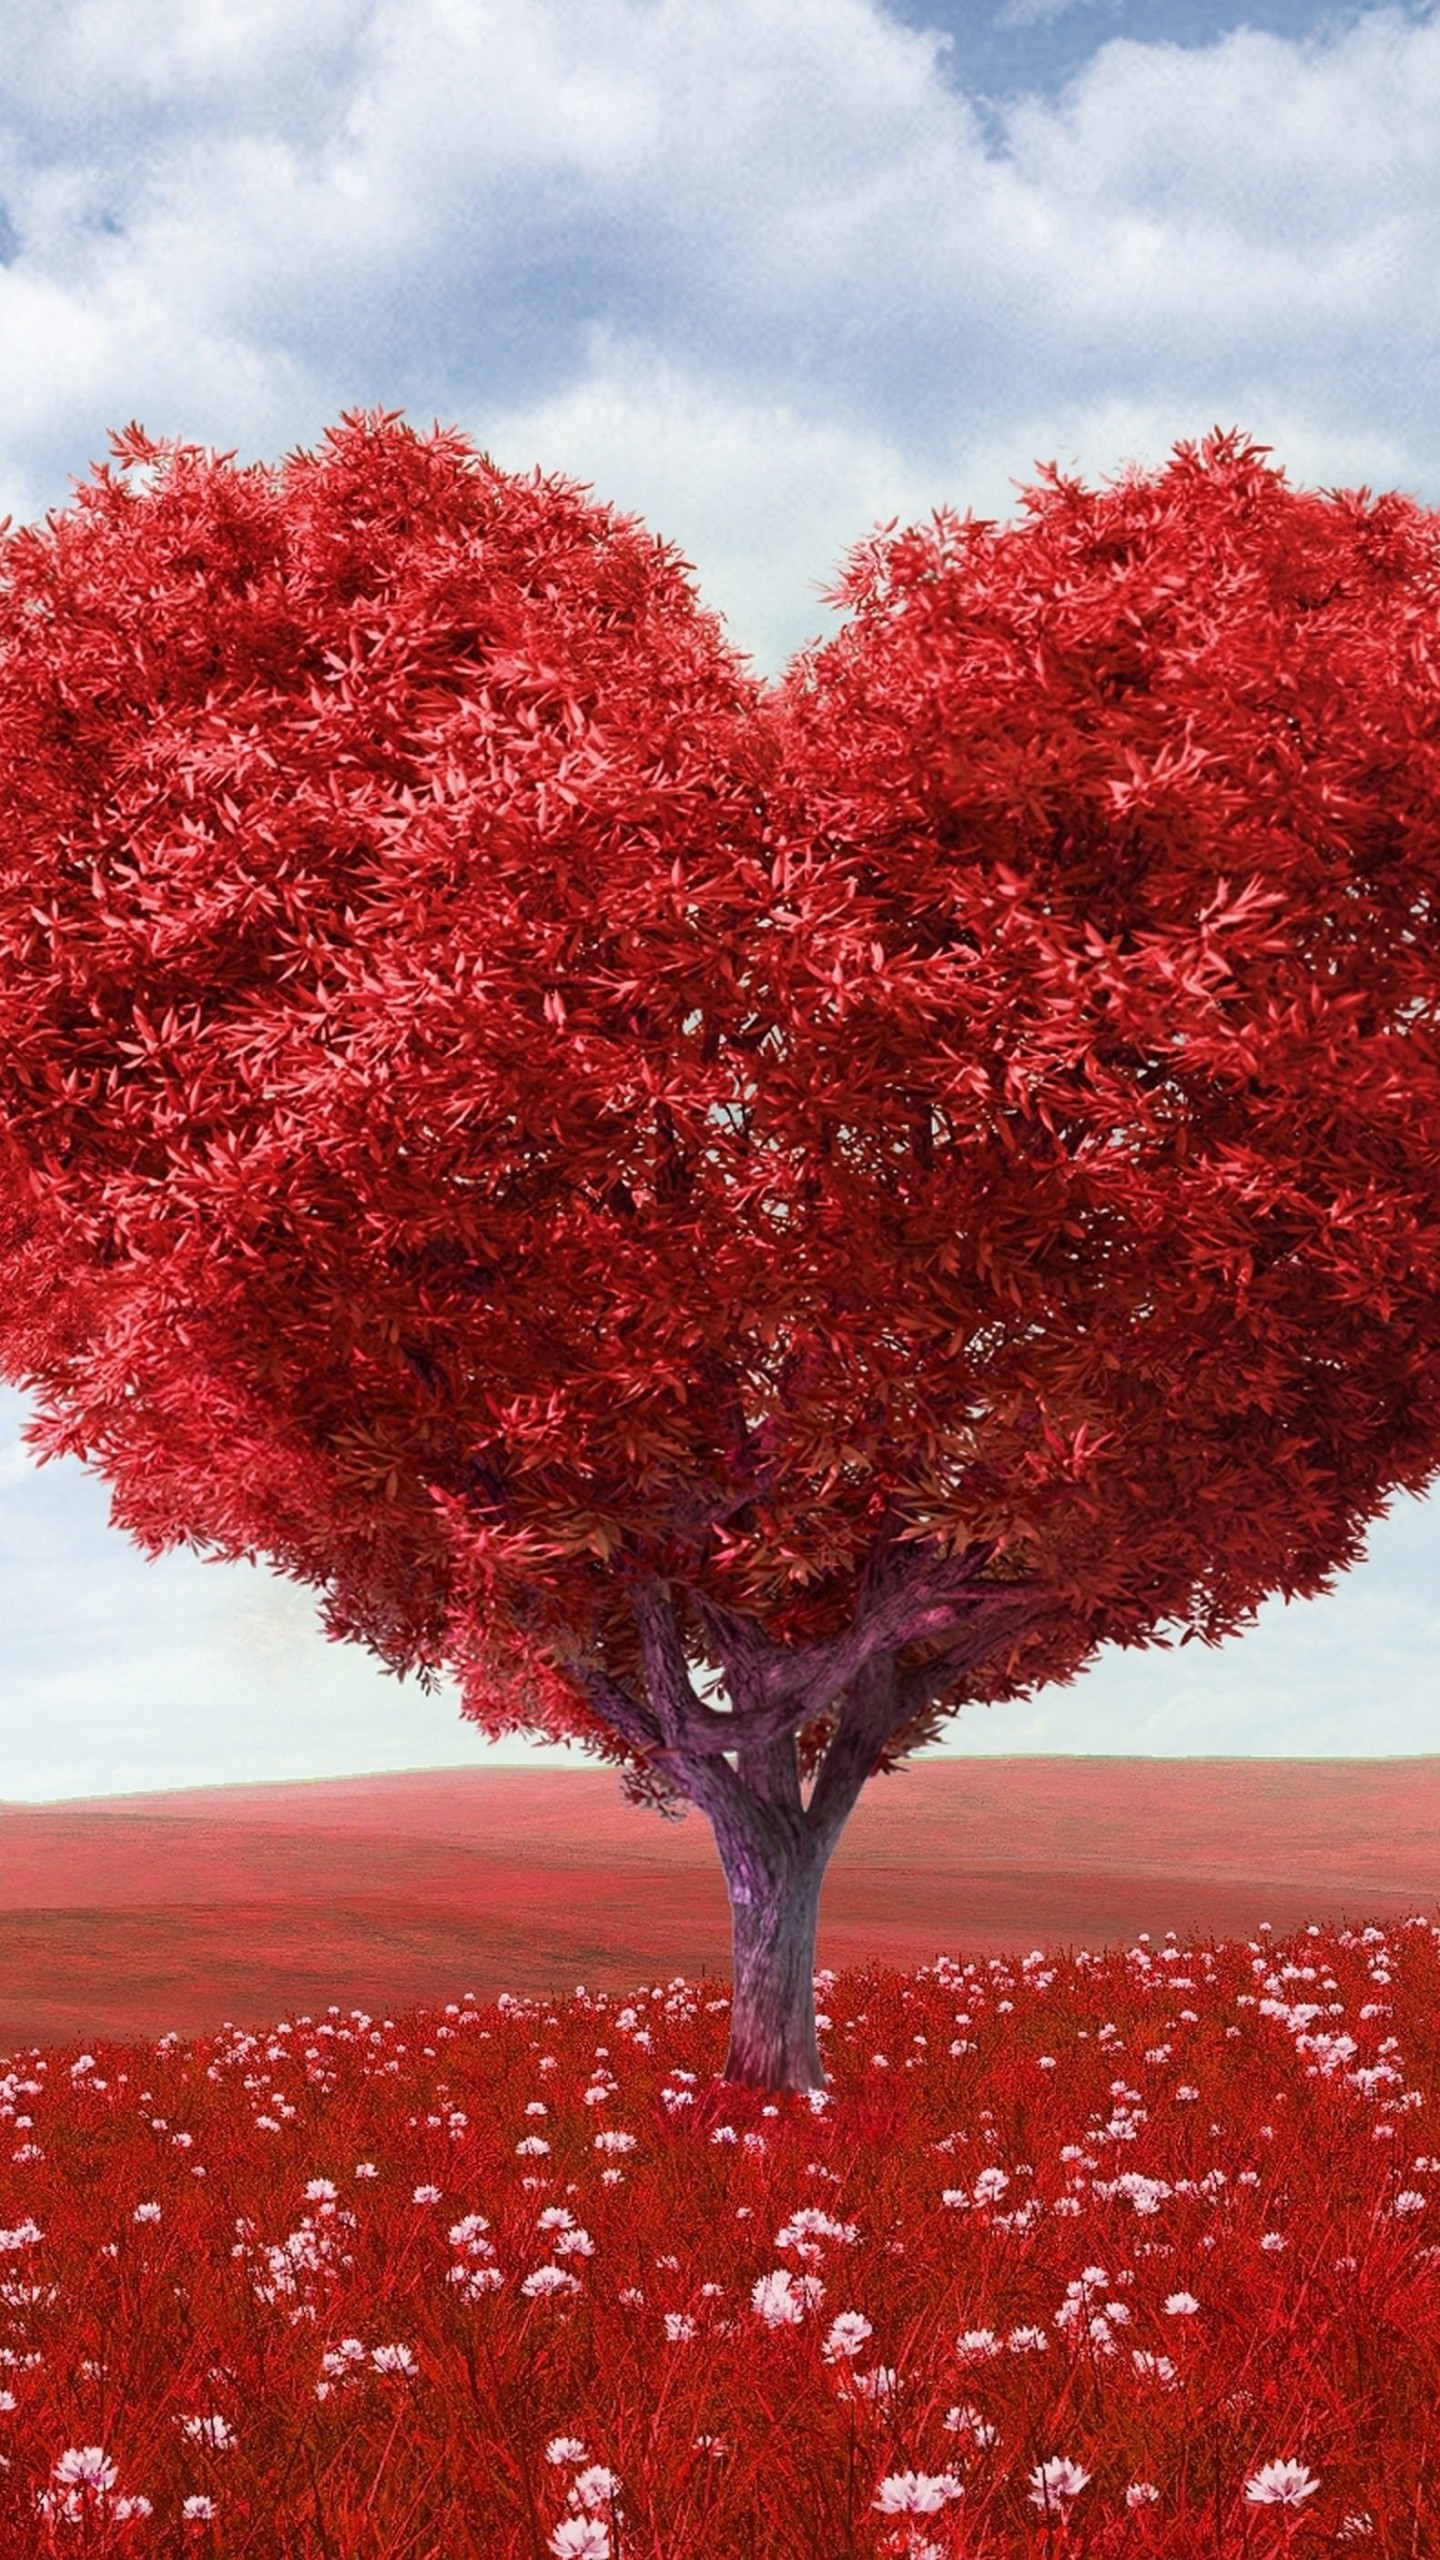 The Tree Of Love Wallpaper for LG G3